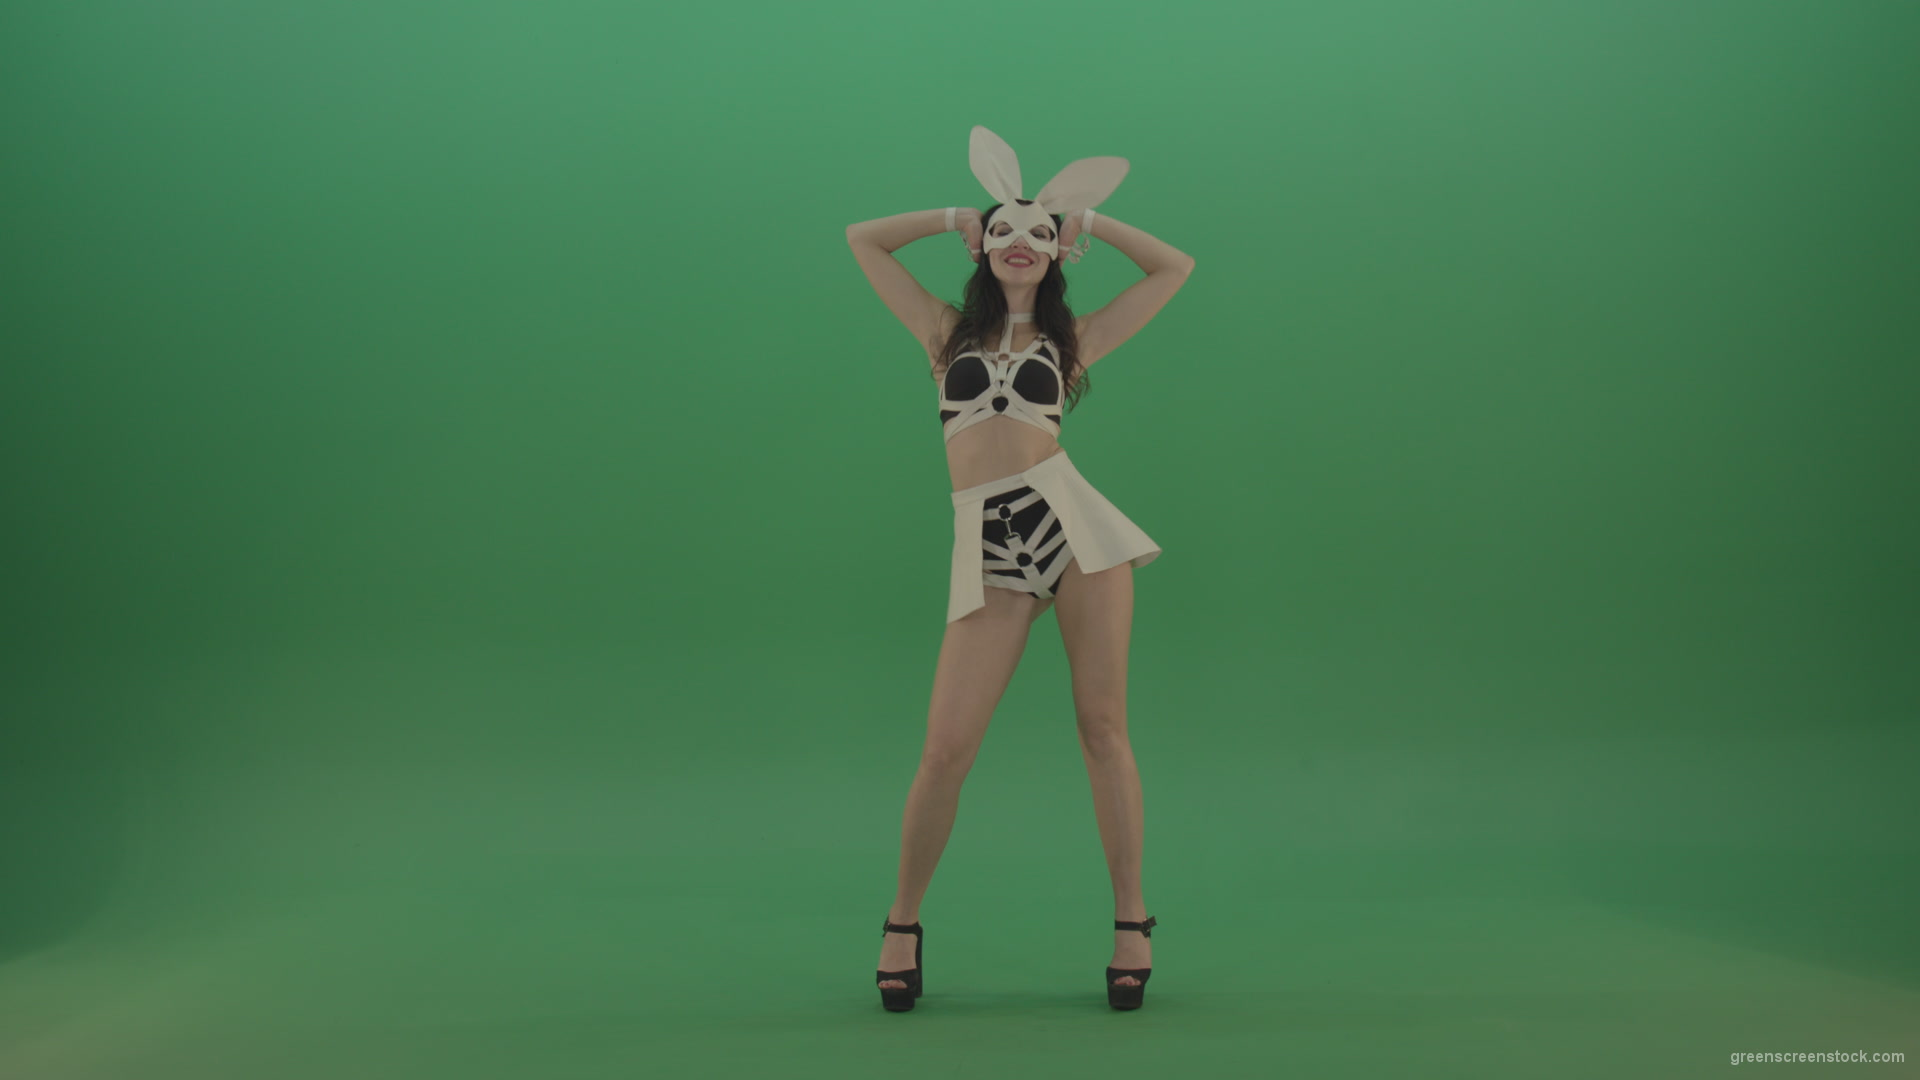 Black-white-sexy-costume-the-girl-moves-the-basin-in-different-directions-on-chromakey-background_008 Green Screen Stock